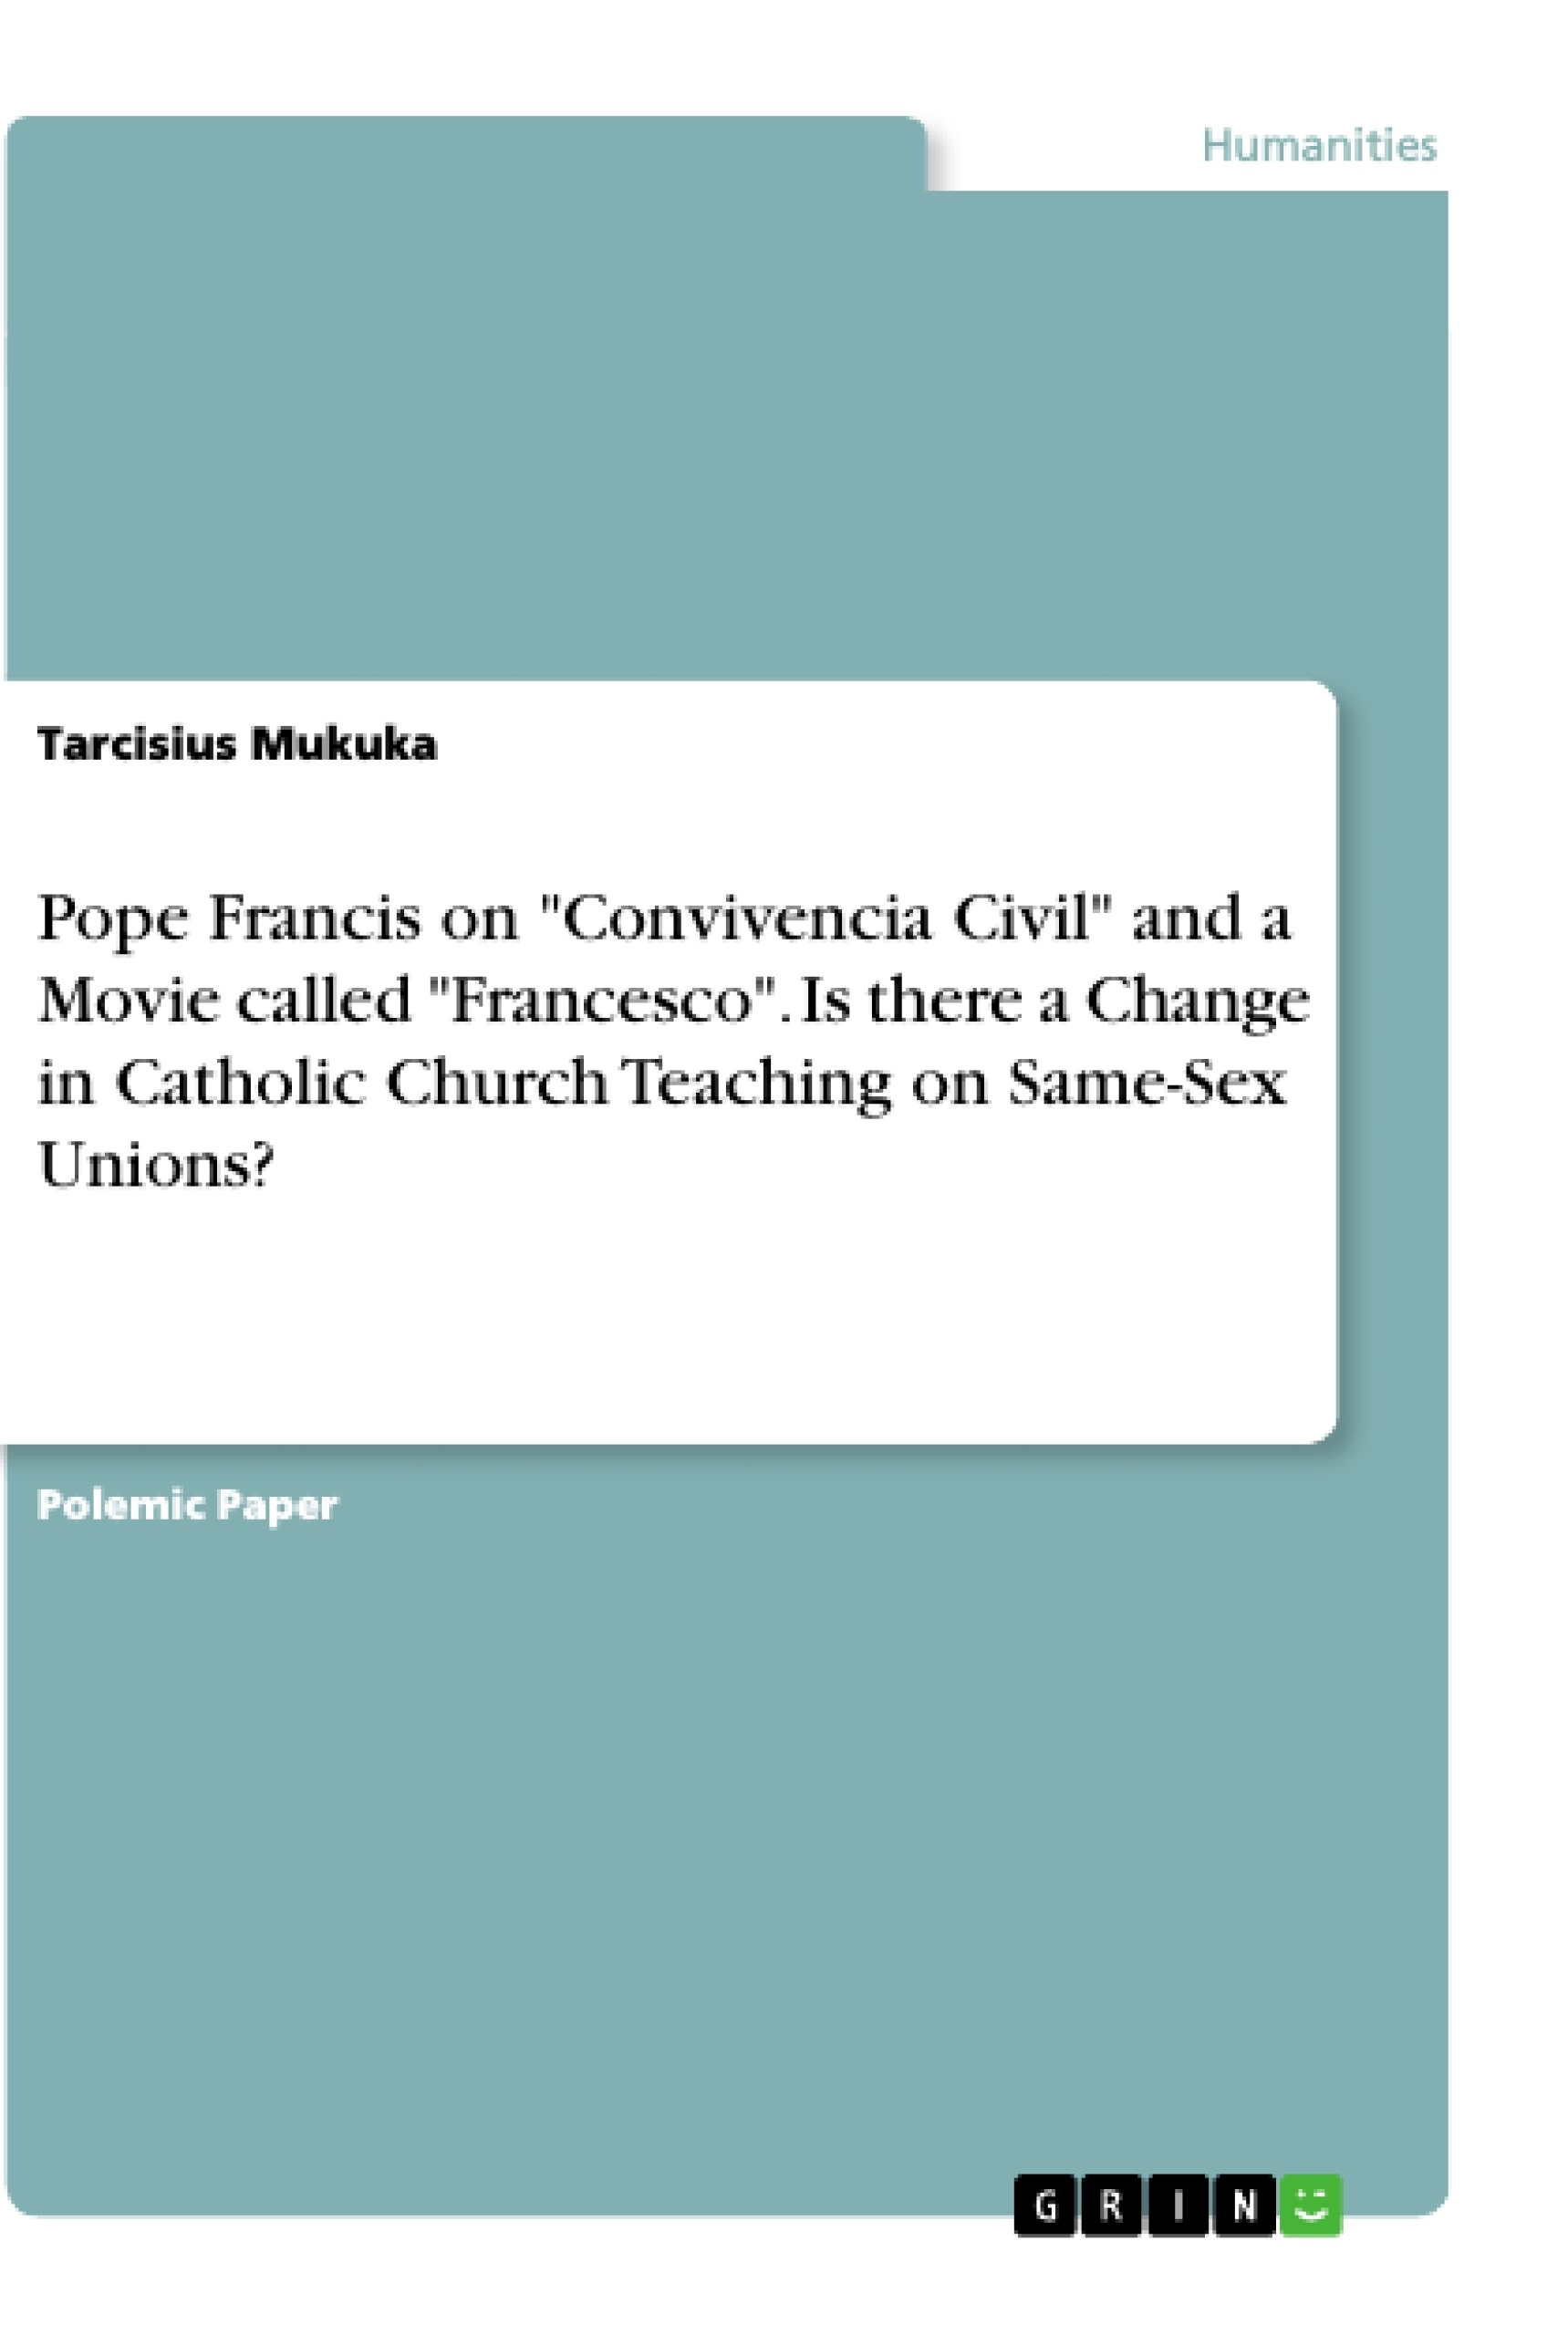 Titre: Pope Francis on "Convivencia Civil" and a Movie called "Francesco". Is there a Change in Catholic Church Teaching on Same-Sex Unions?